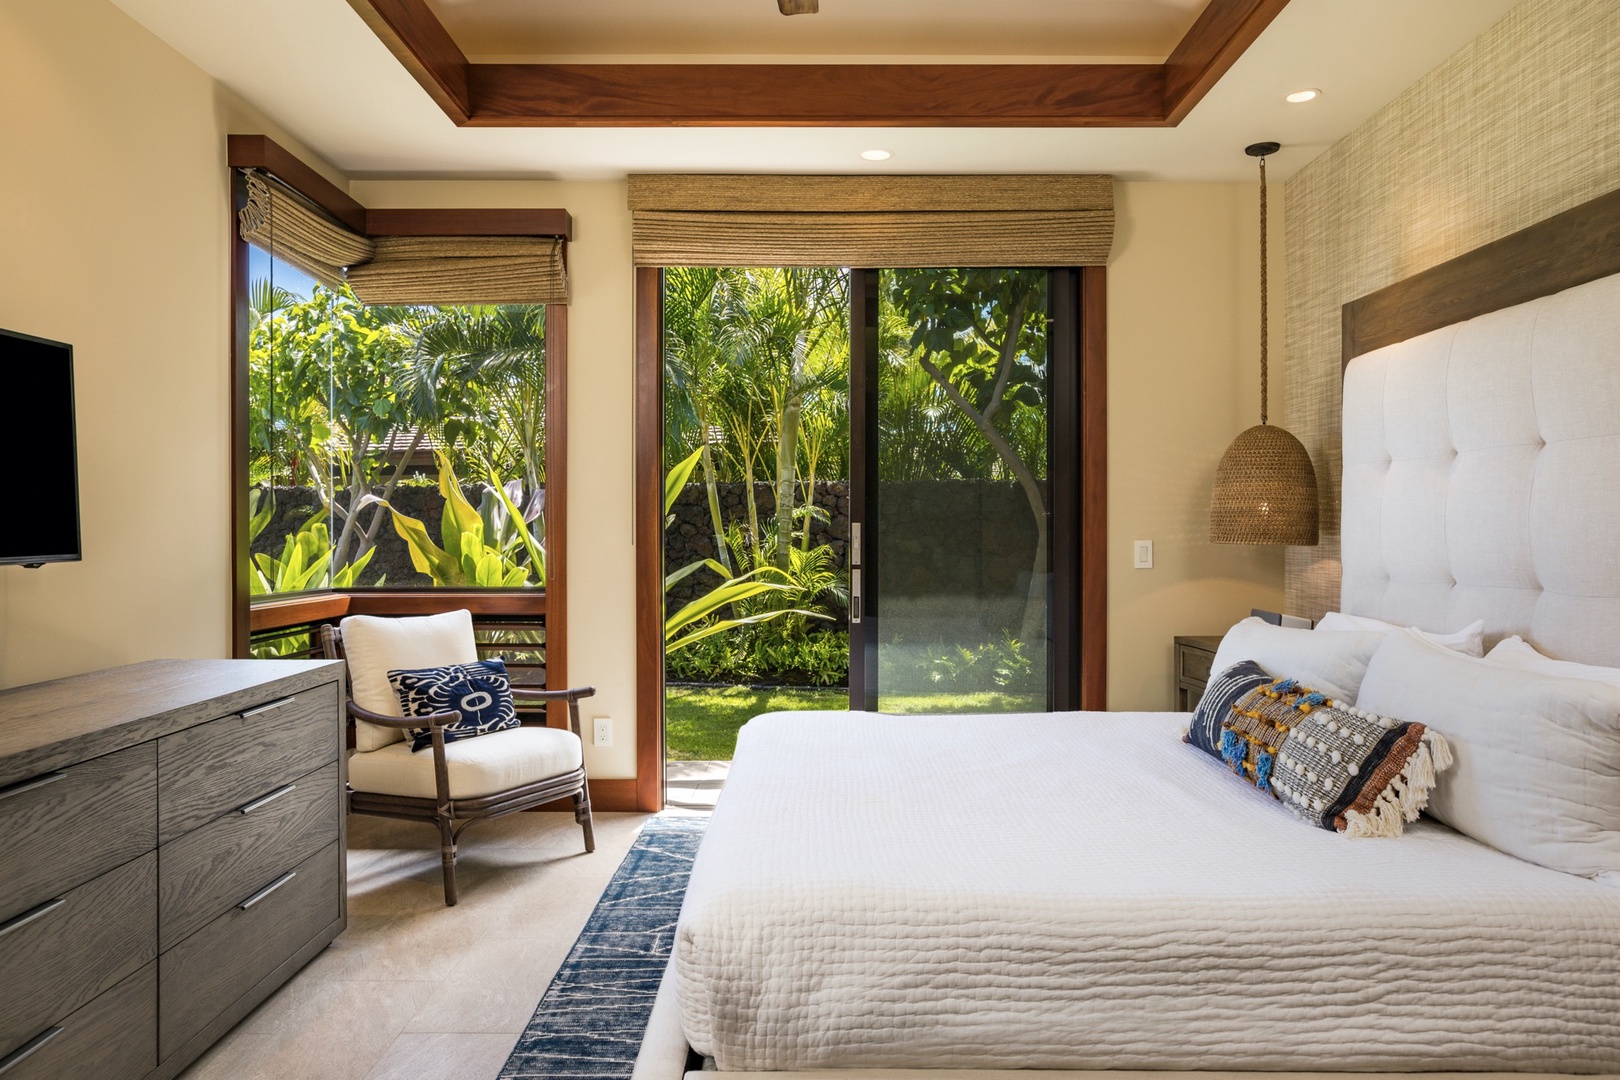 Kailua Kona Vacation Rentals, 4BD Kulanakauhale (3558) Estate Home at Four Seasons Resort at Hualalai - Guest bedroom two, off the kitchen, boasts sliding doors to a private lanai with lawn area.